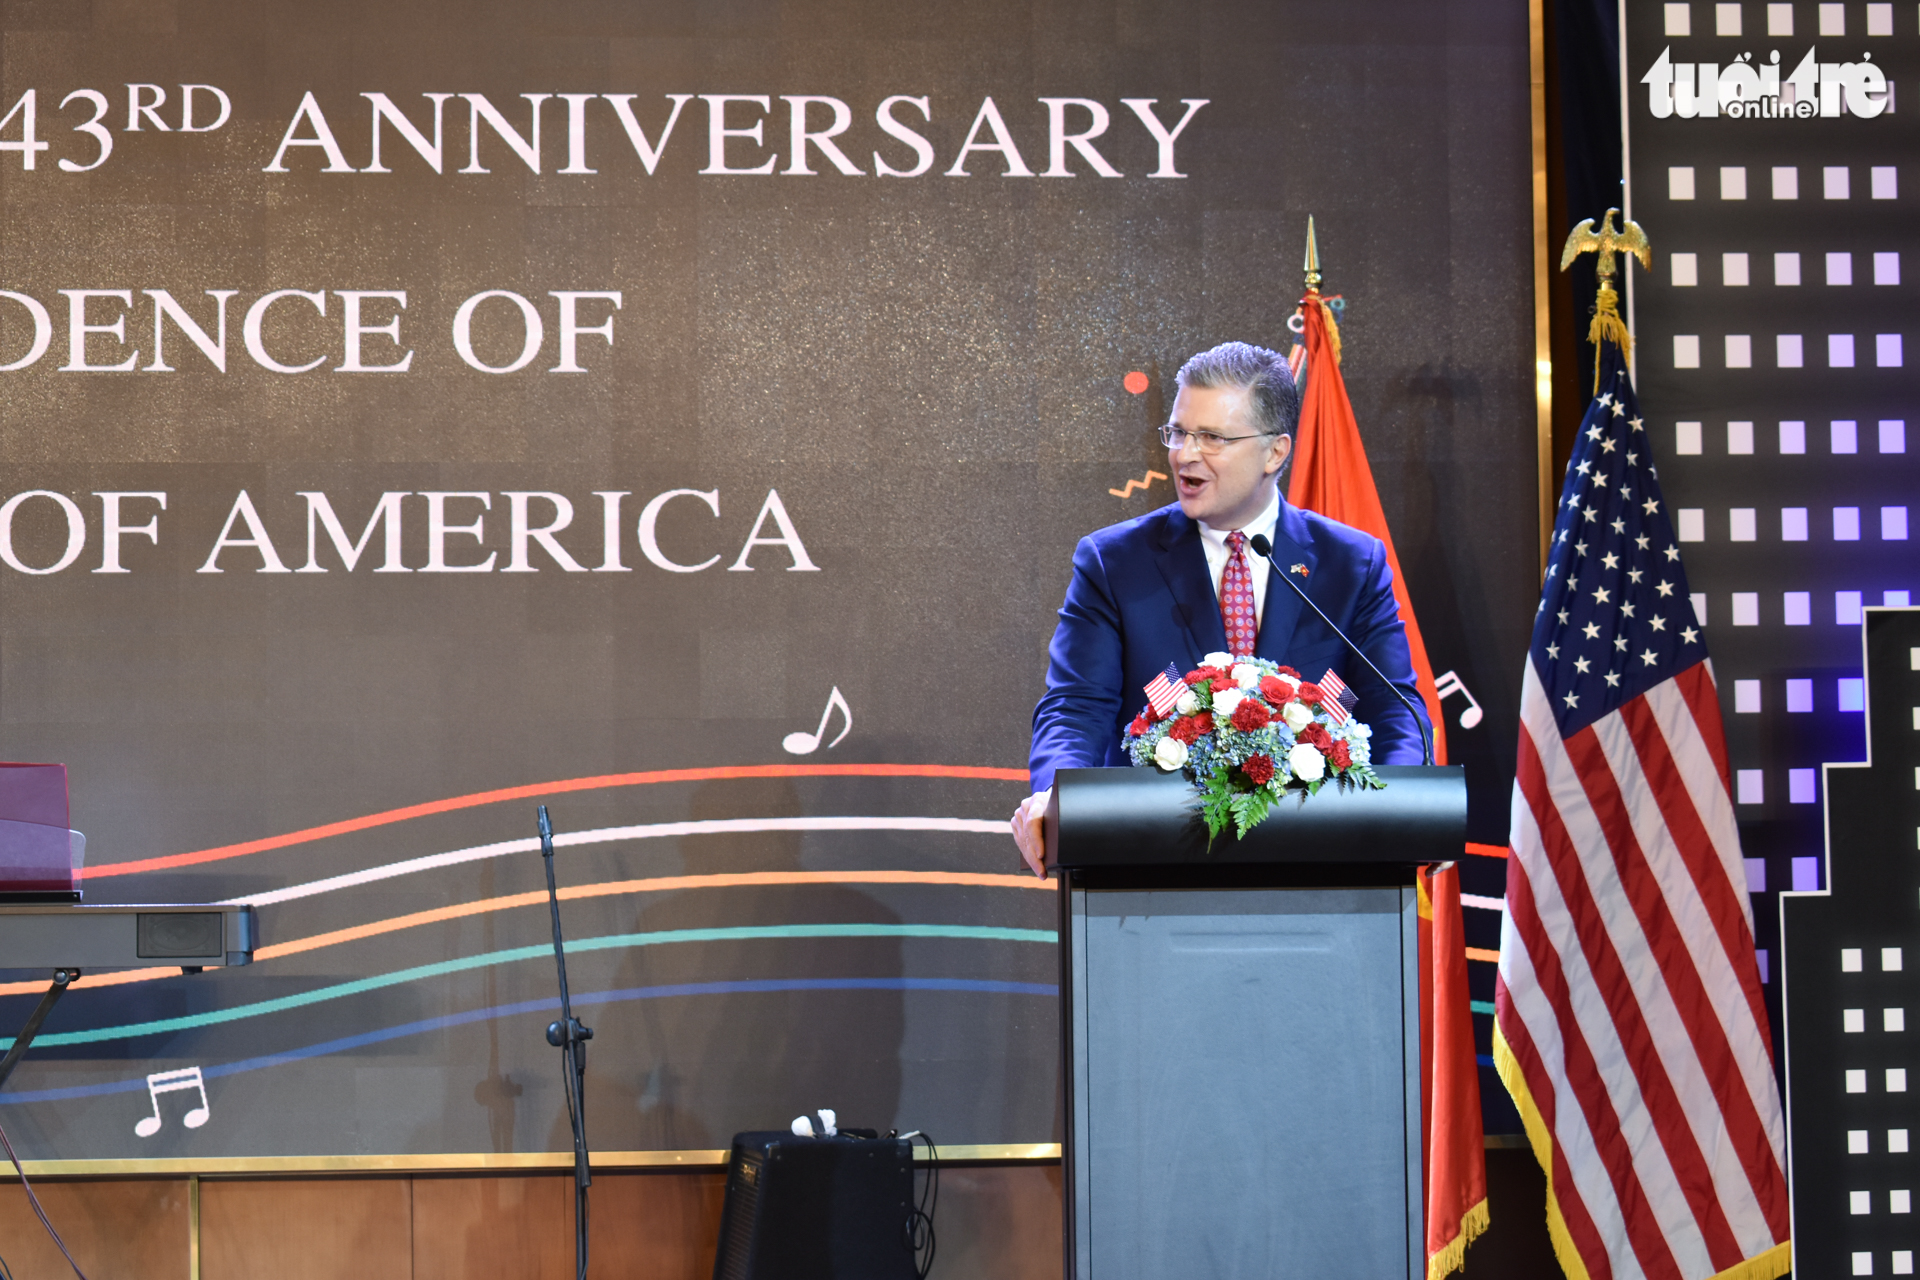 U.S. Ambassador to Vietnam Daniel Kritenbrink addresses an event celebrating the 243rd U.S. Independence Day in Ho Chi Minh City on June 5, 2019. Photo: Tuan Son / Tuoi Tre News